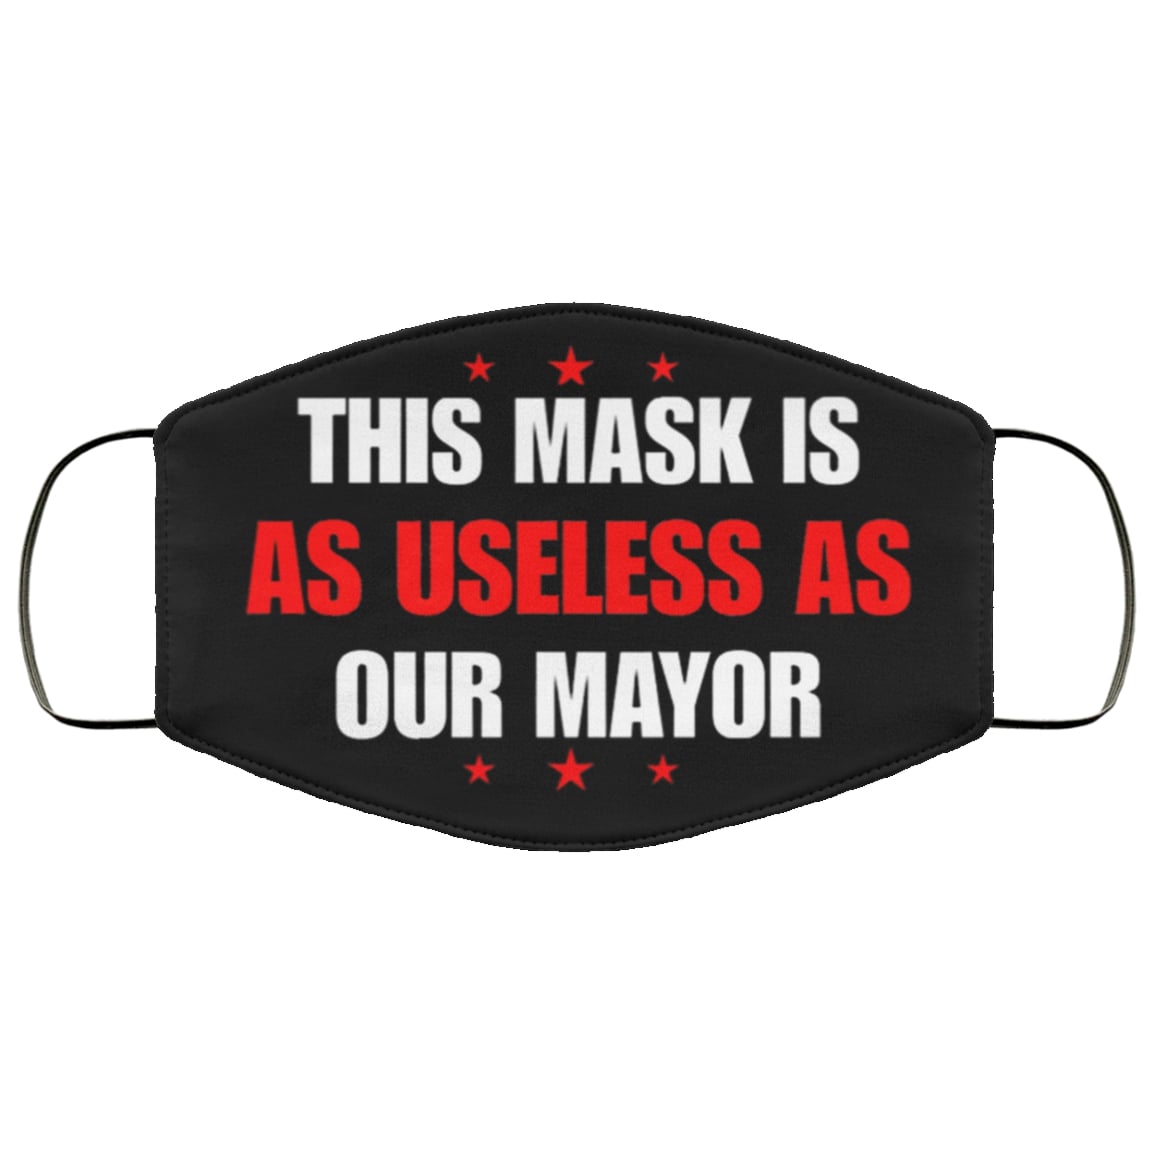 This mask is as useless as our mayor anti pollution face mask - maria